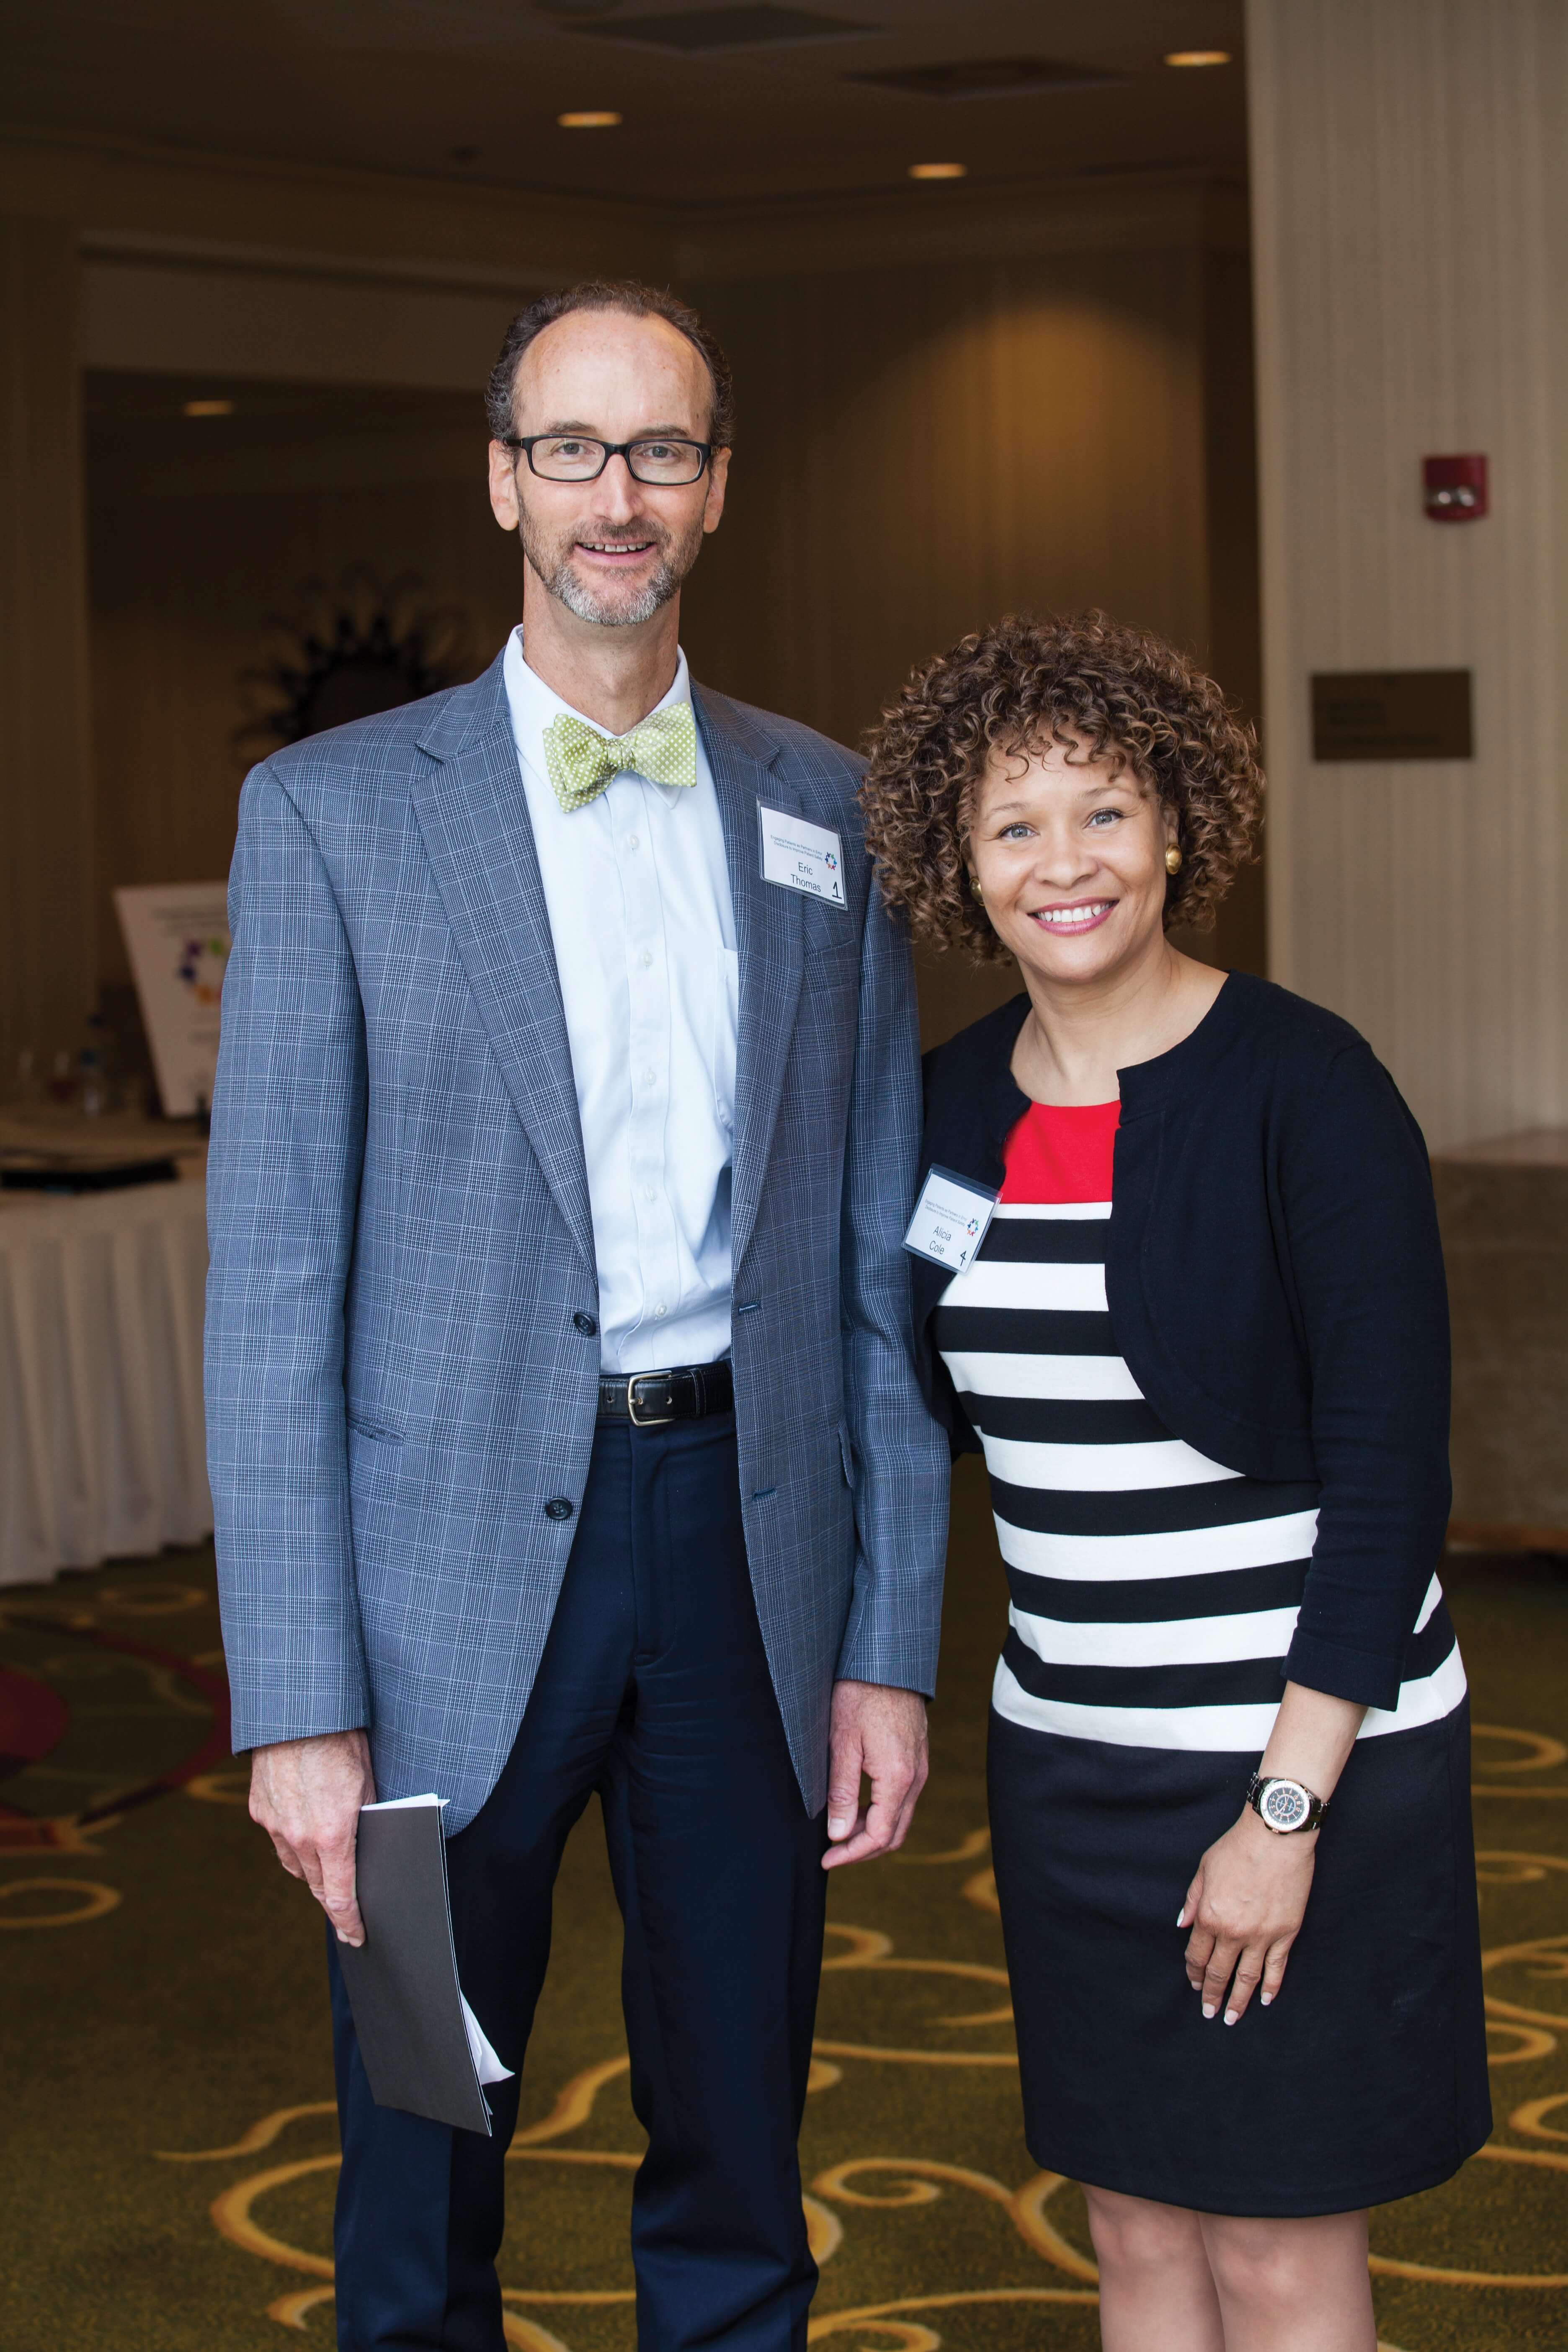 Embracing the potential for partnership, Eric Thomas, M.D., MPH, professor of medicine at the UTHealth Medical School, and Alicia Cole, a patient safety consultant, stand together in their efforts to engage patients in medical error analysis.